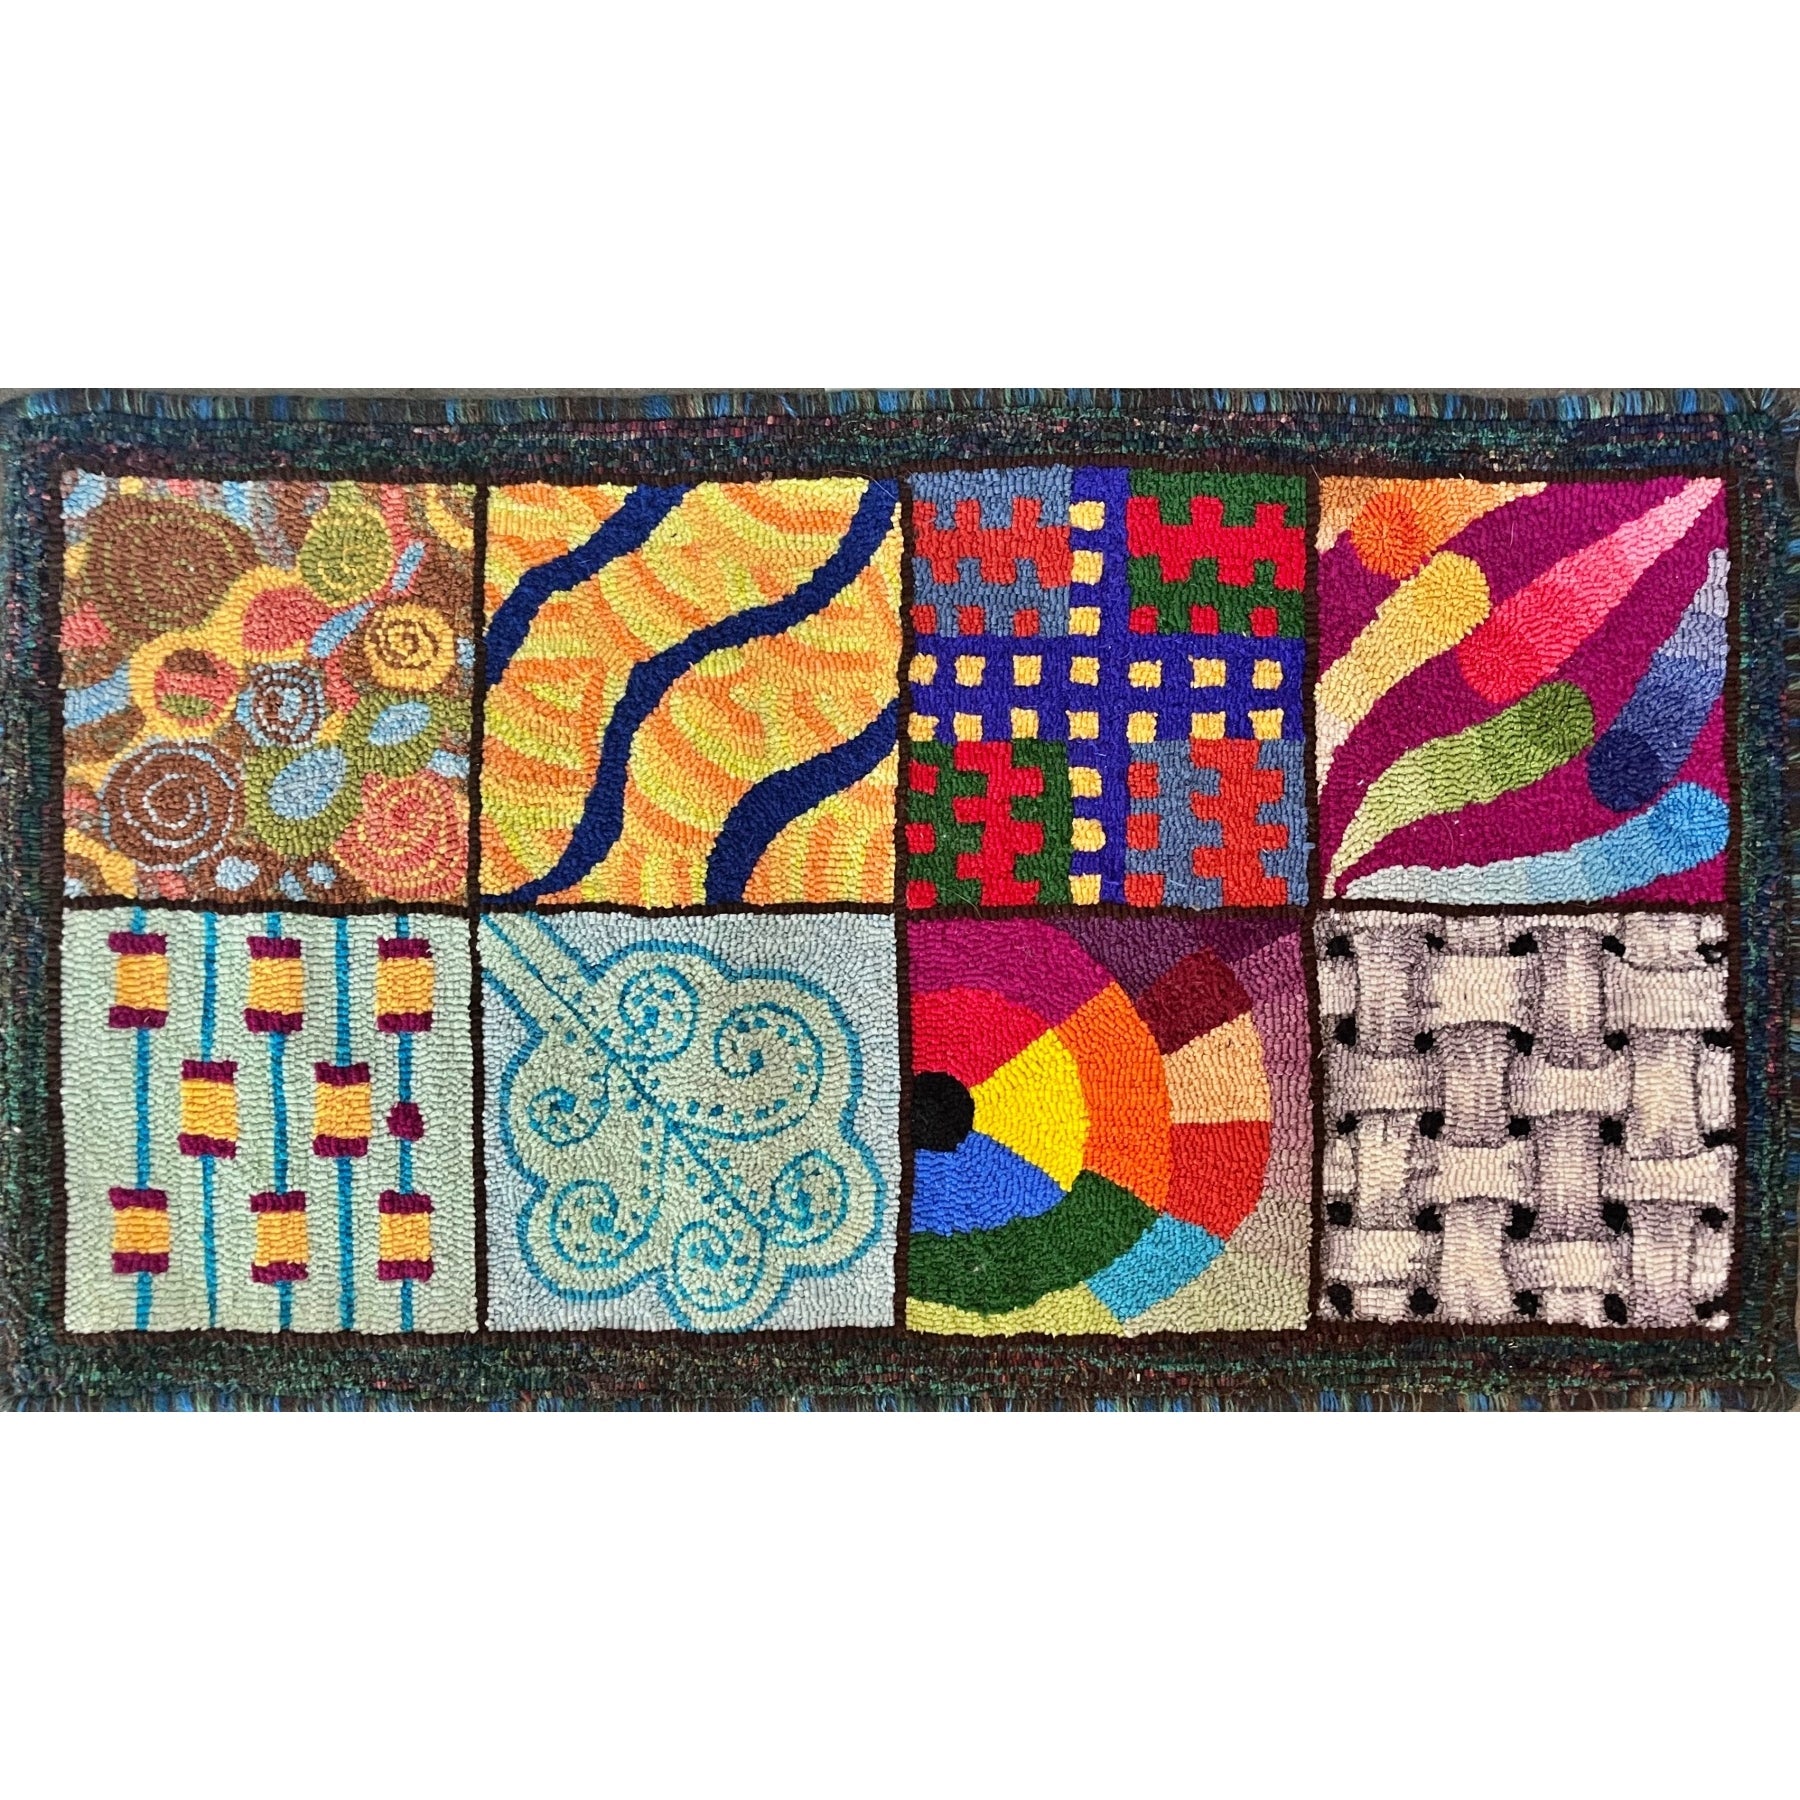 Zen Quilt, rug hooked by Janet Williams